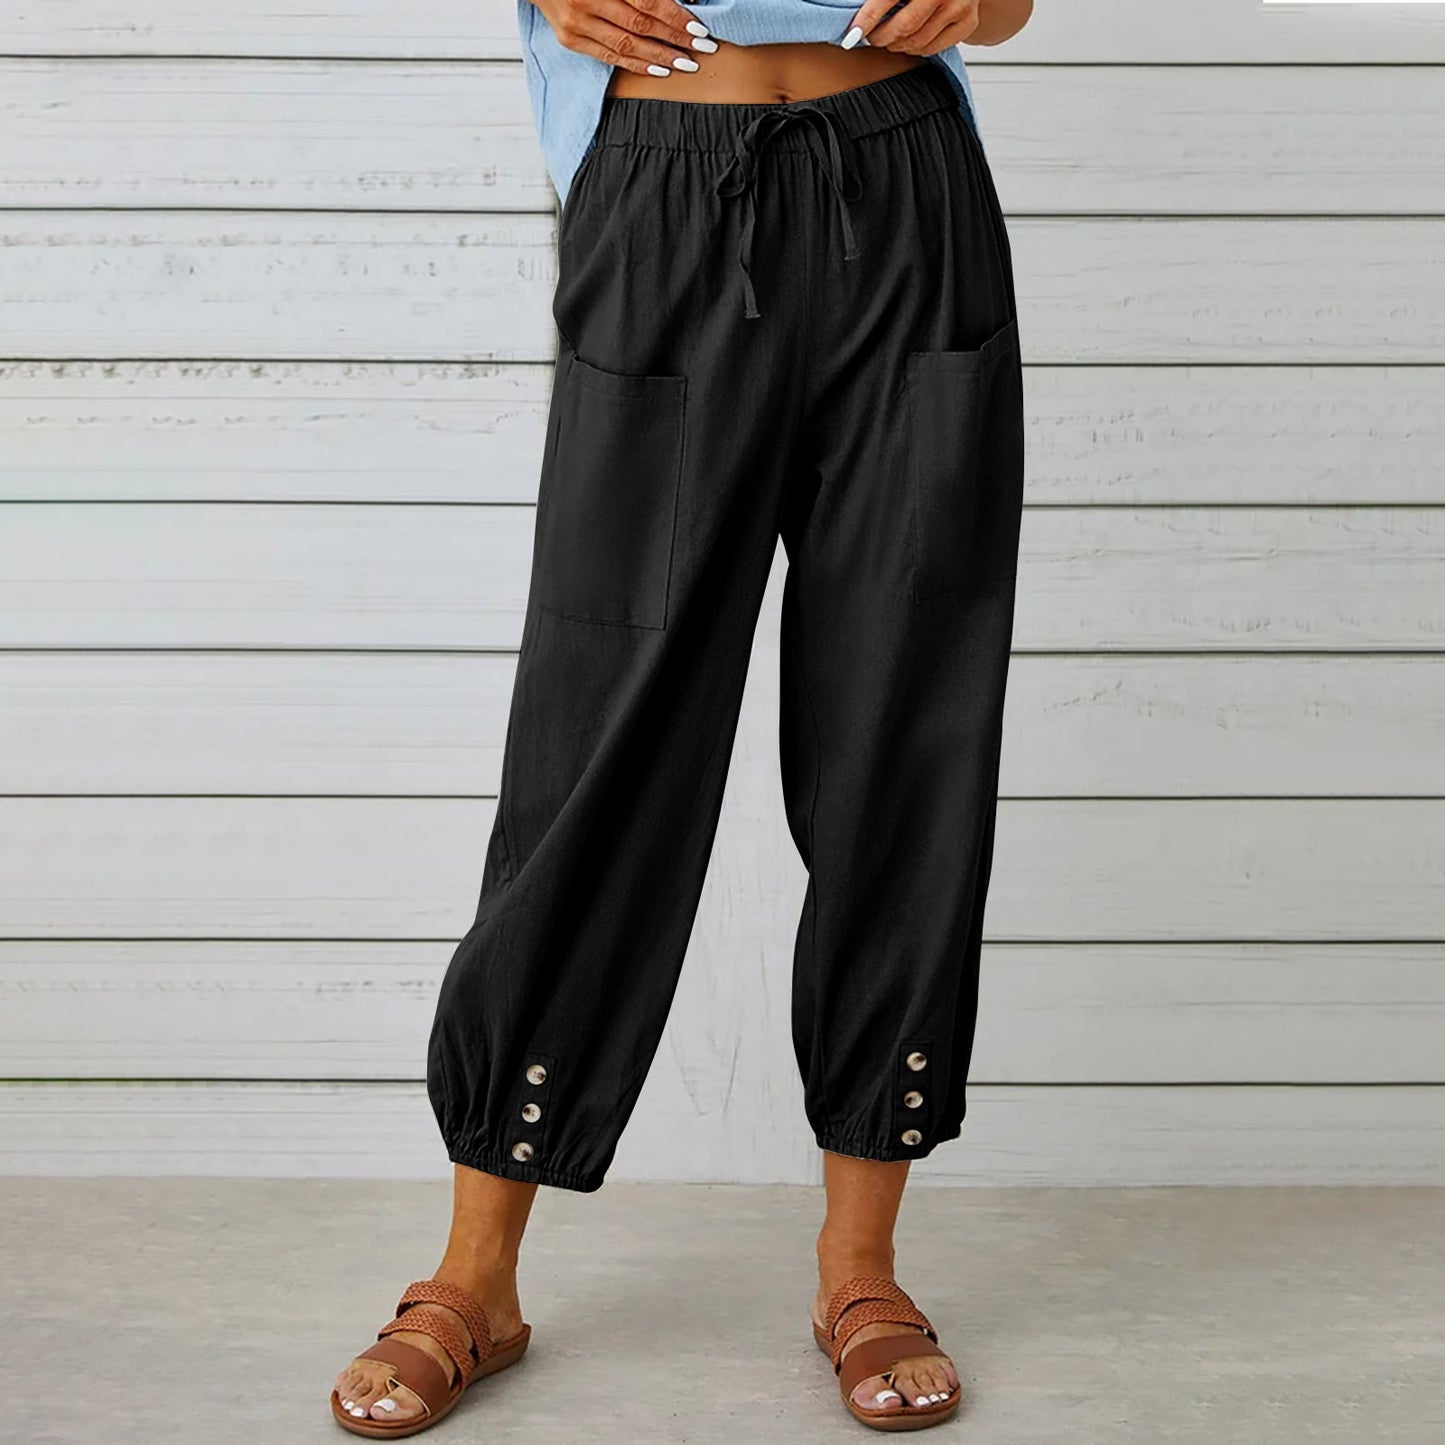 Effortless Comfort and Style: Women's Drawstring Tie Pants